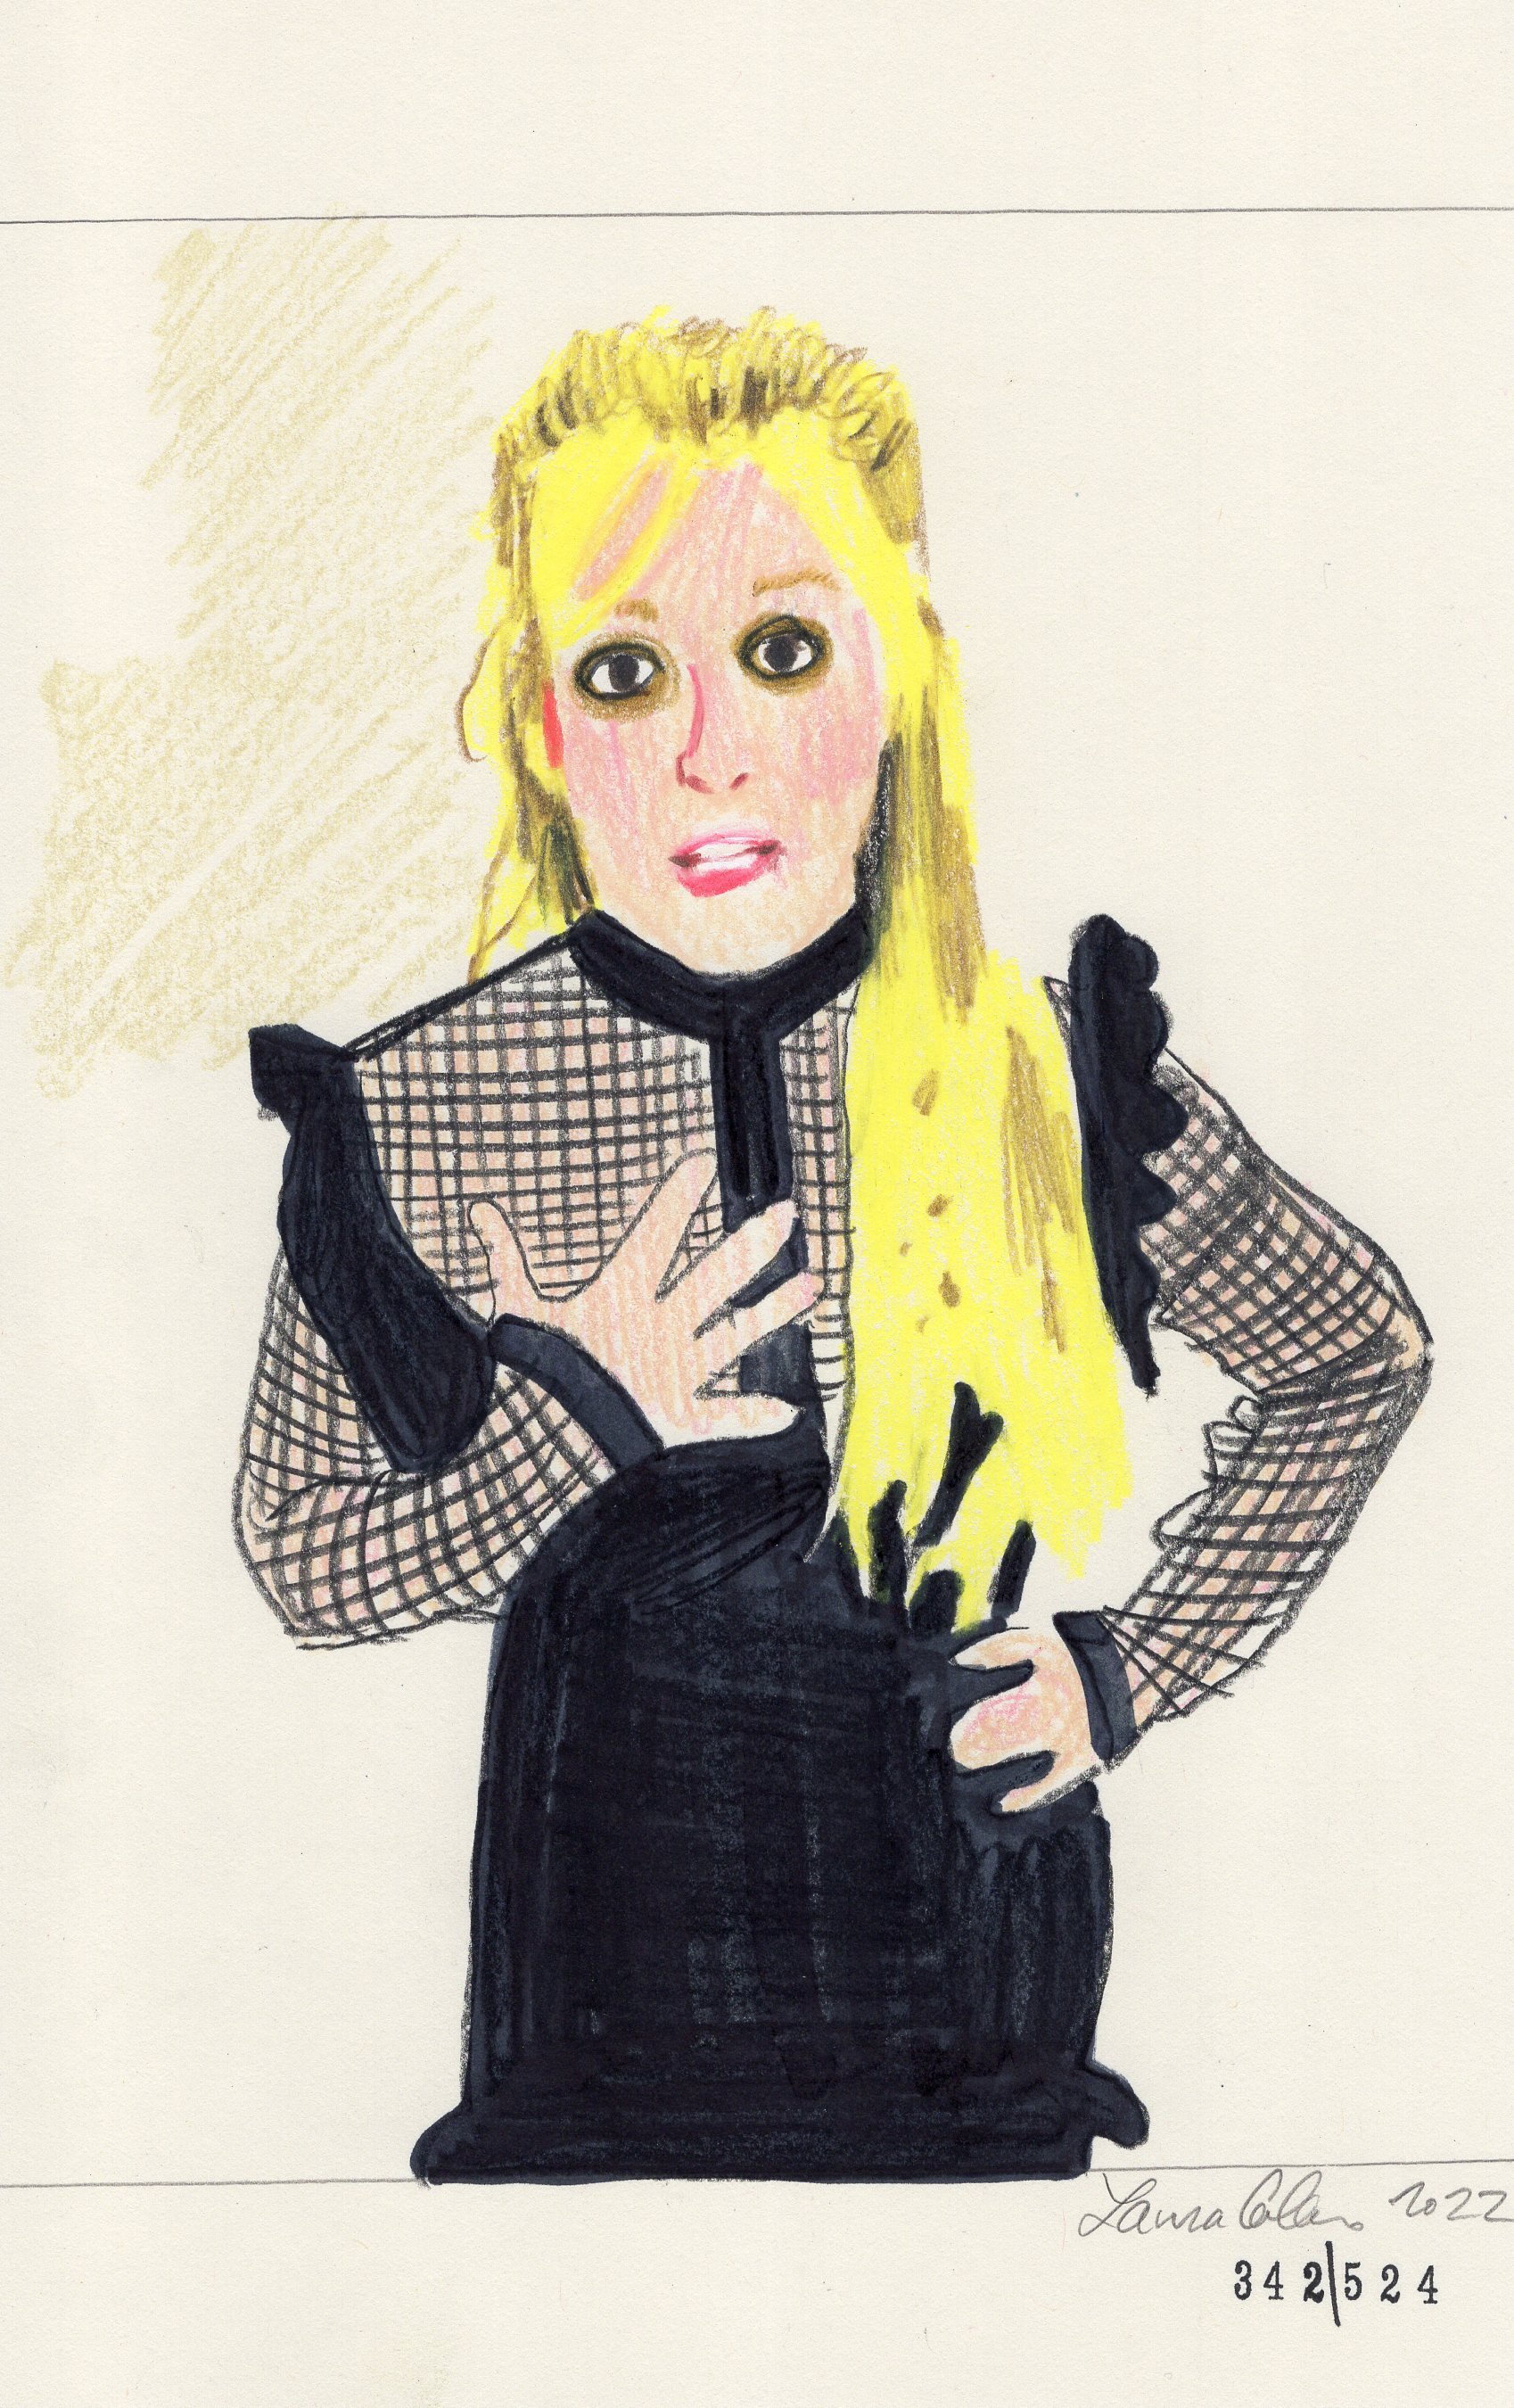 Laura Collins Britney Spears Animation 6x9in mixed media 2022 no342.jpg